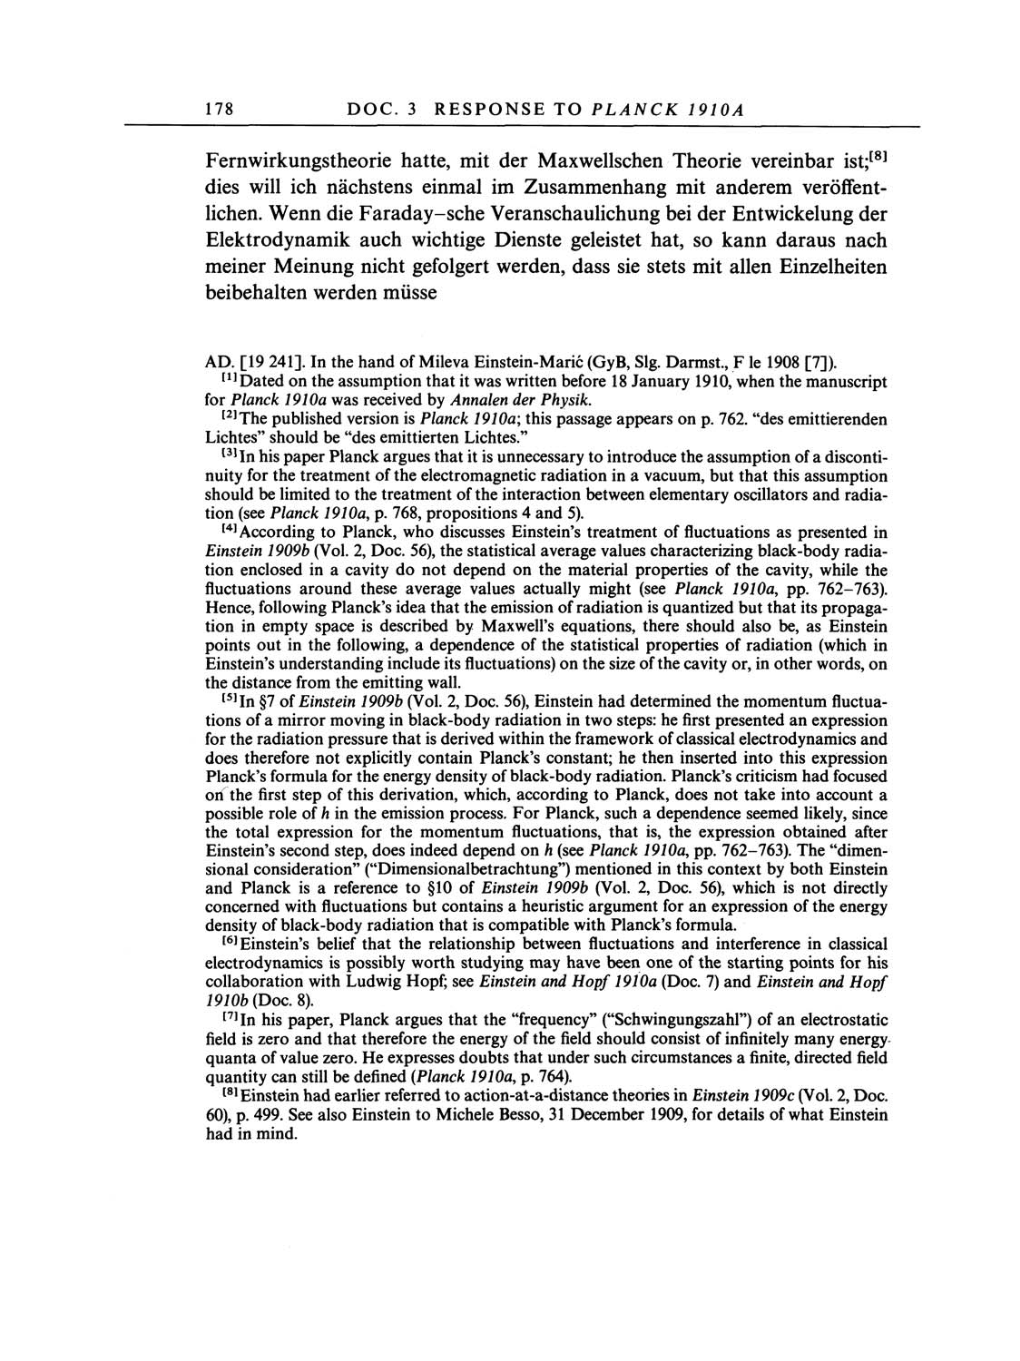 Volume 3: The Swiss Years: Writings 1909-1911 page 178